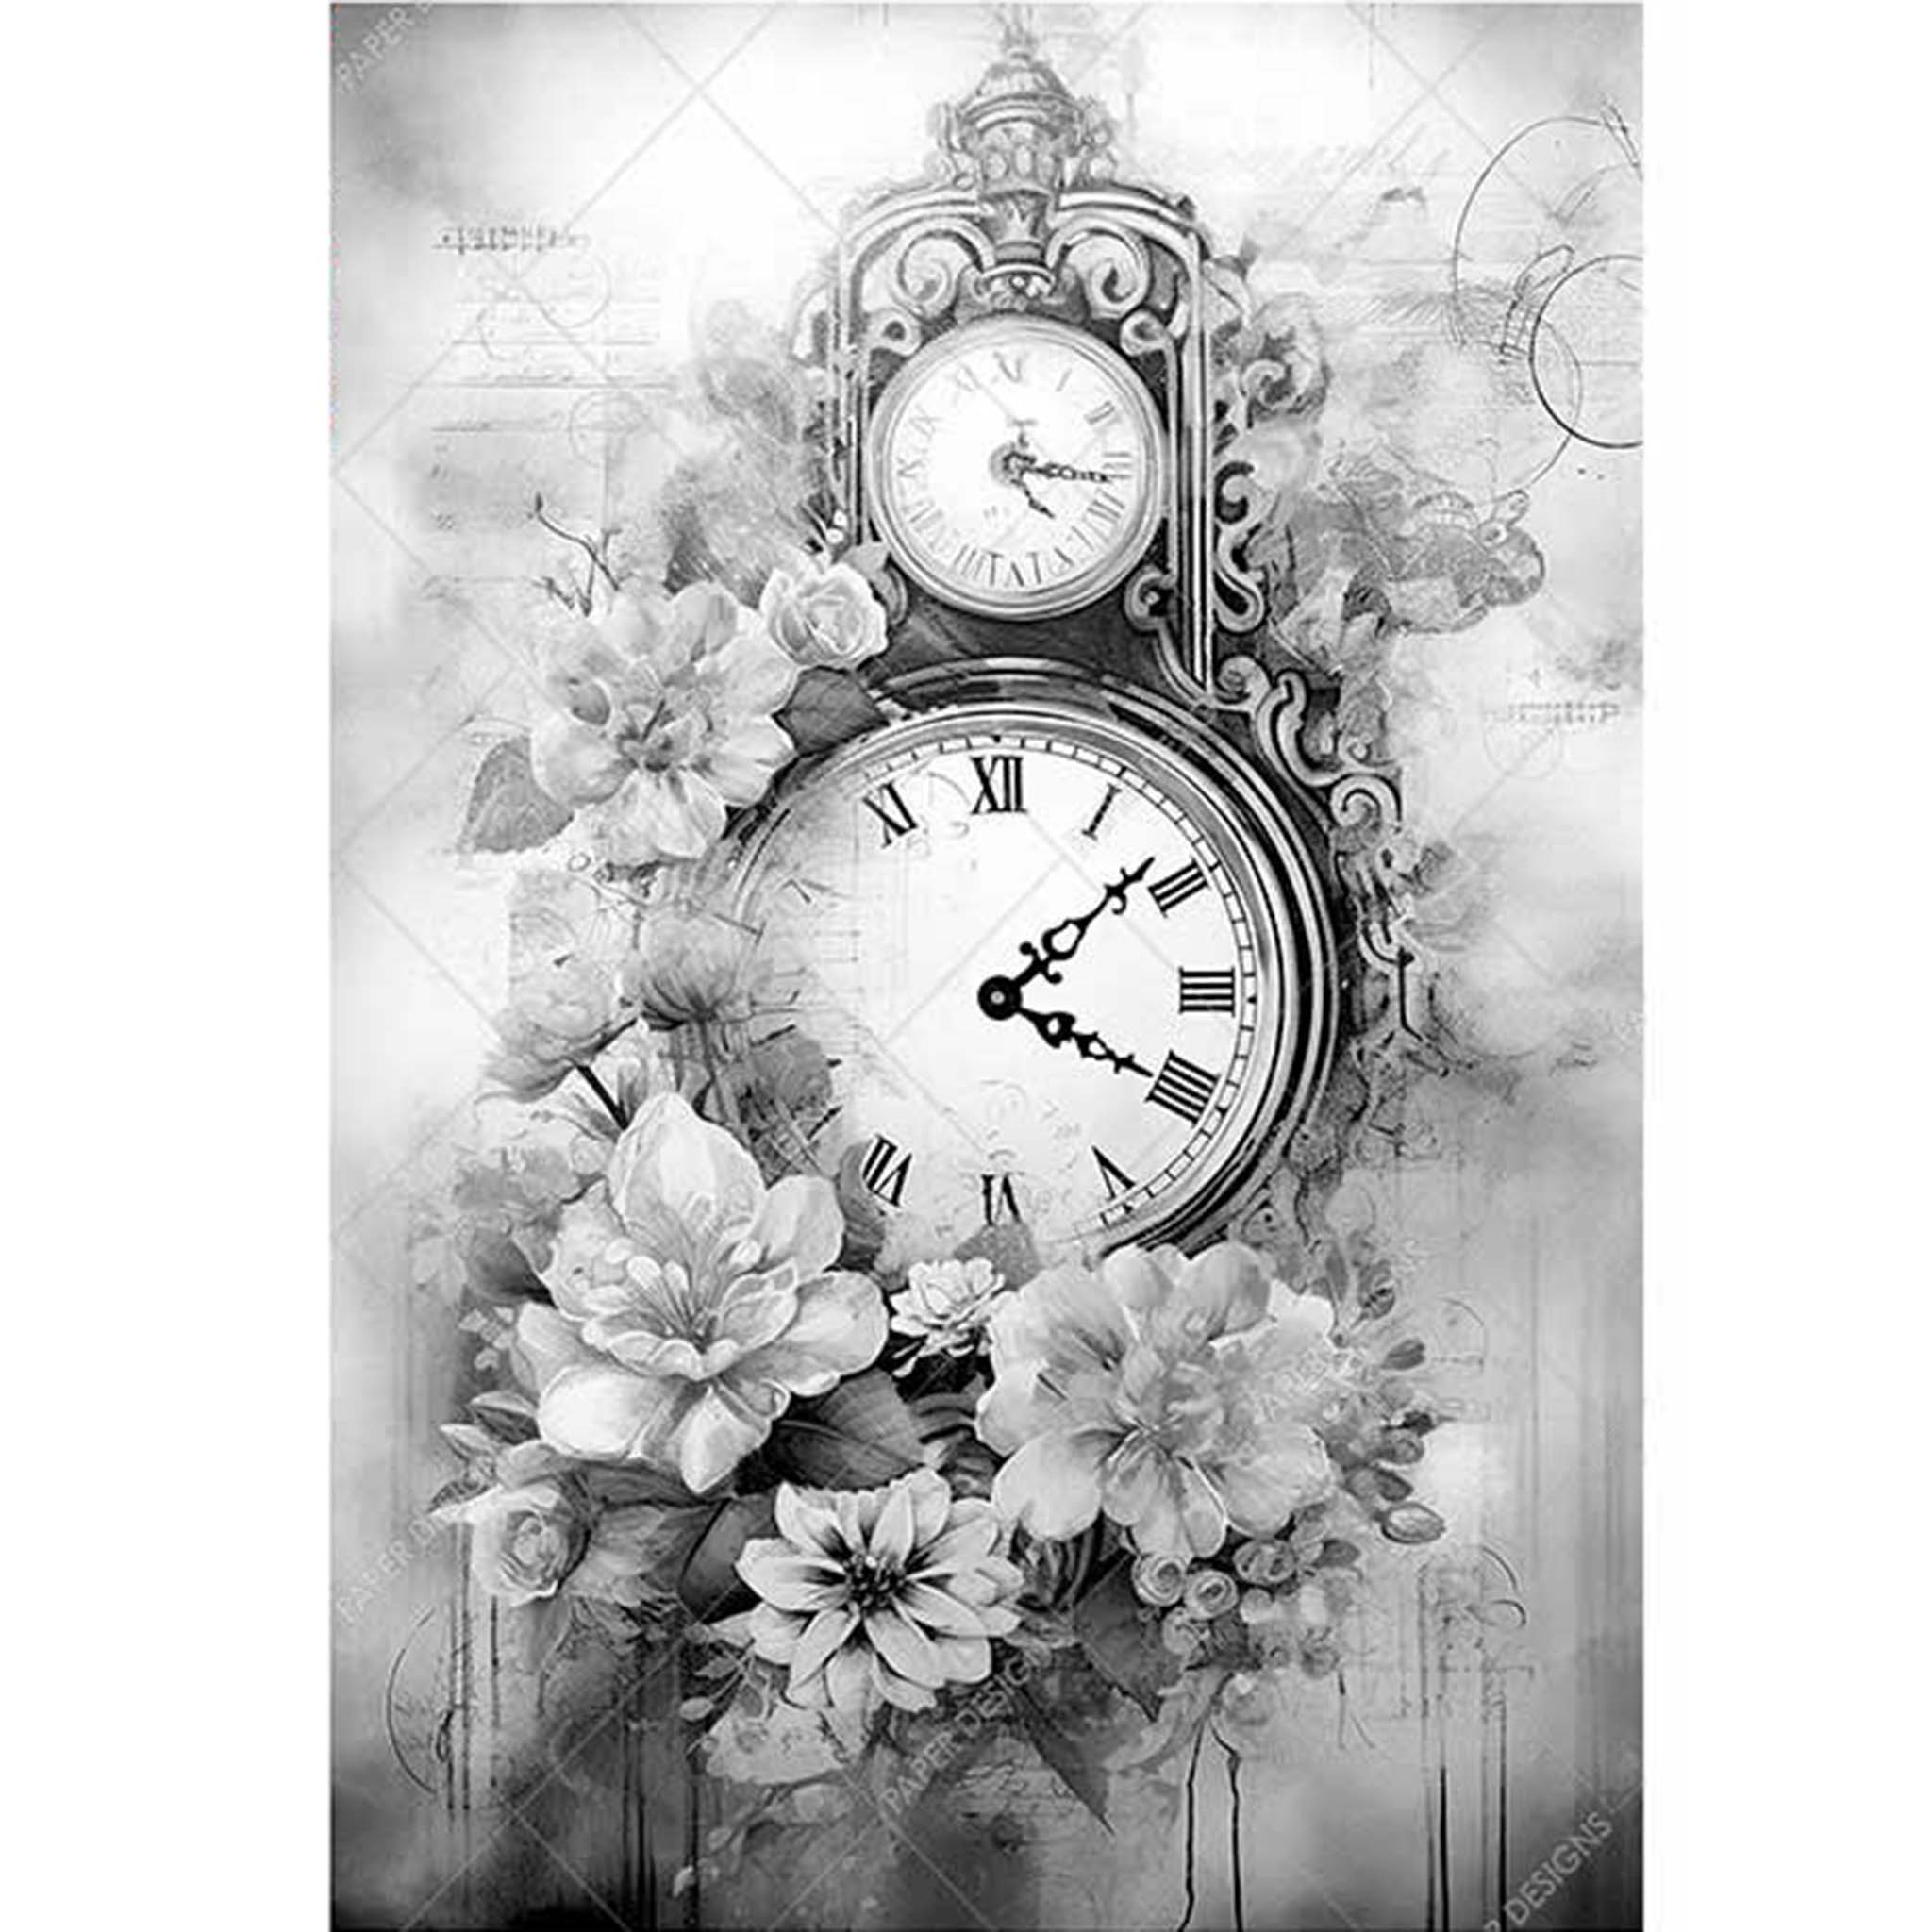 A4 rice paper design featuring a black and white image of an ornate clock surrounded by delicate flowers. White borders are on the sides.